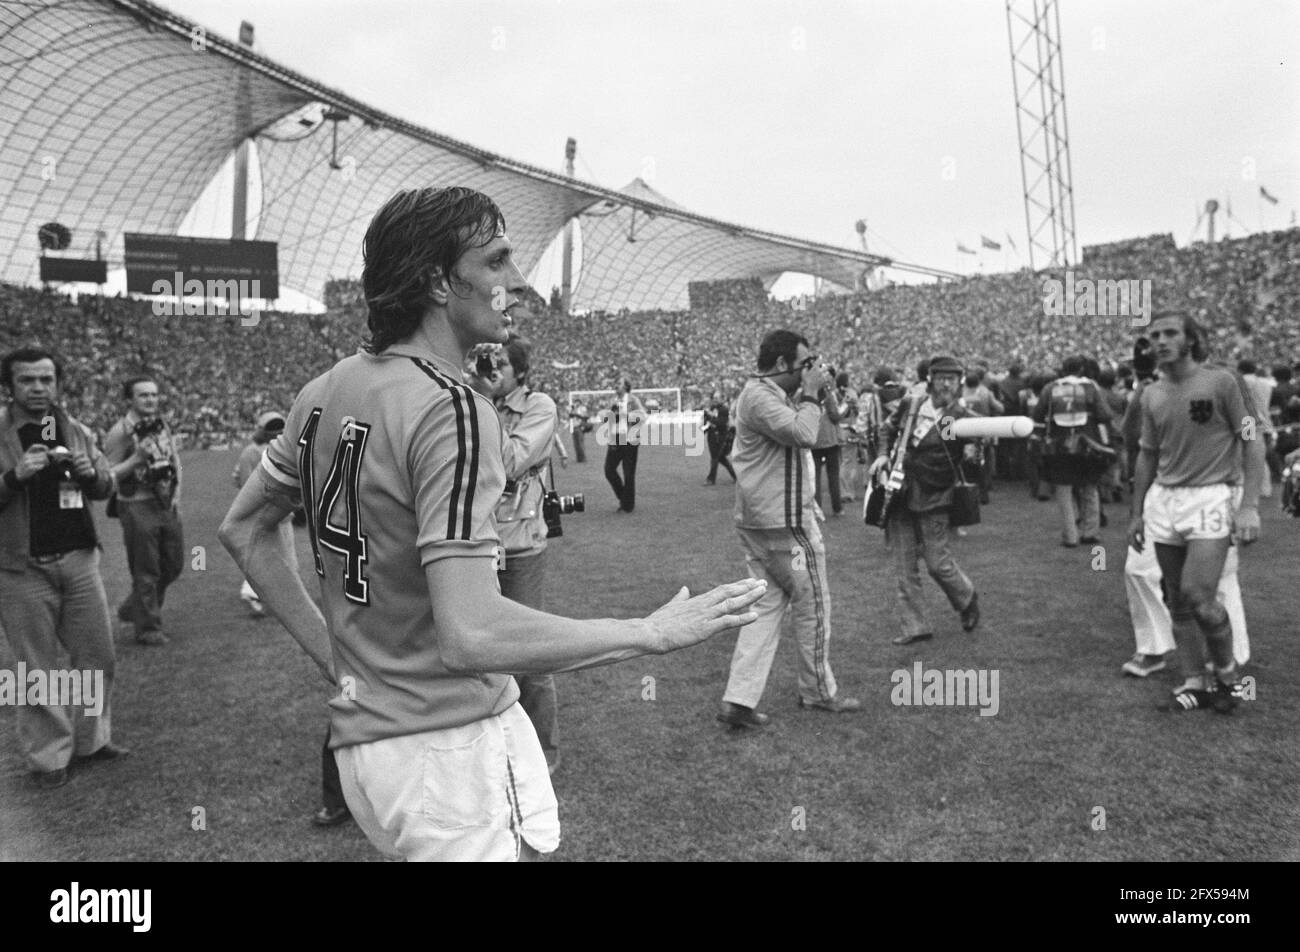 World Cup final 1974 in Munich, West Germany v Netherlands 2-1; Cruijff leaves the field, July 7, 1974, finals, sports, soccer, world championships, The Netherlands, 20th century press agency photo, news to remember, documentary, historic photography 1945-1990, visual stories, human history of the Twentieth Century, capturing moments in time Stock Photo